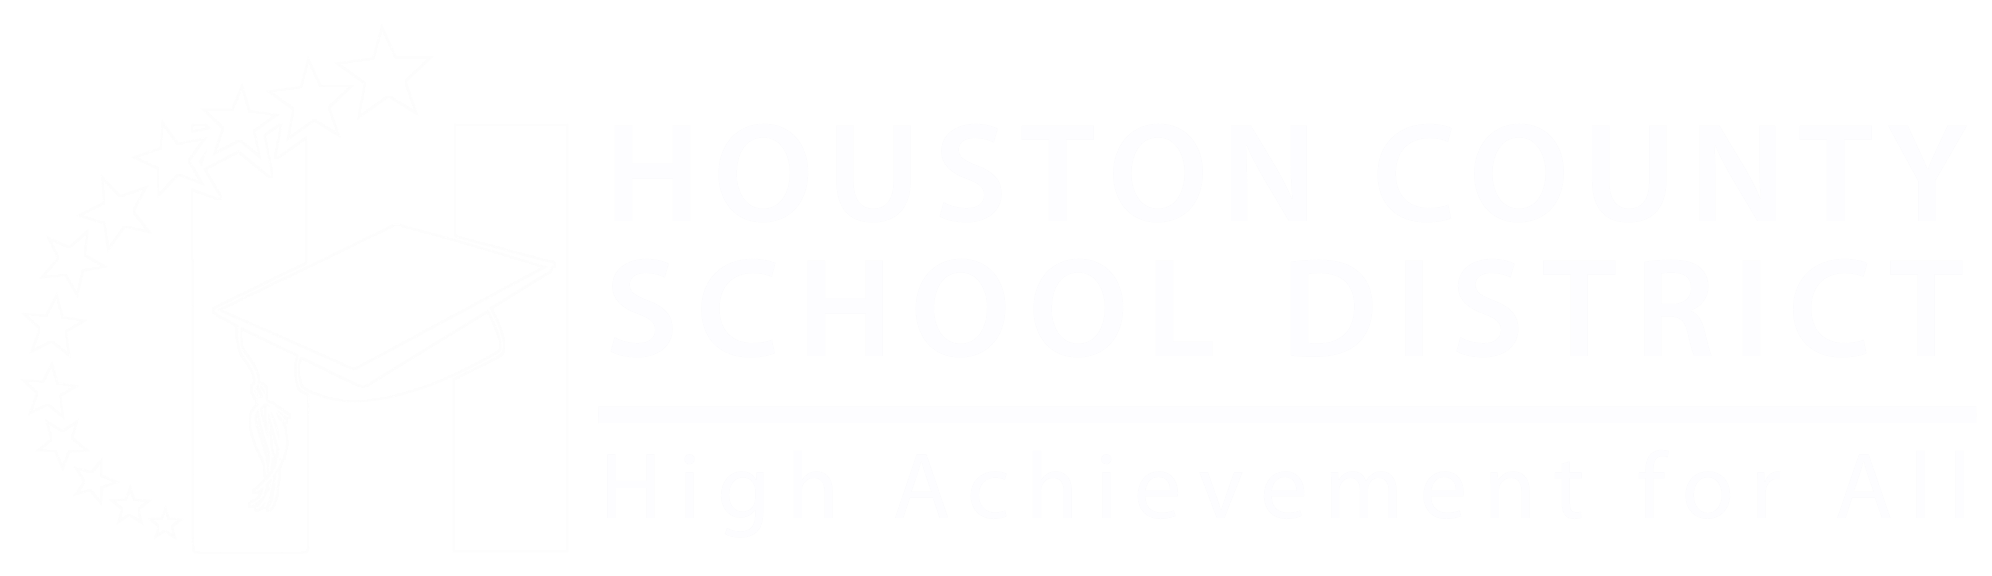 Houston County School District Footer Logo